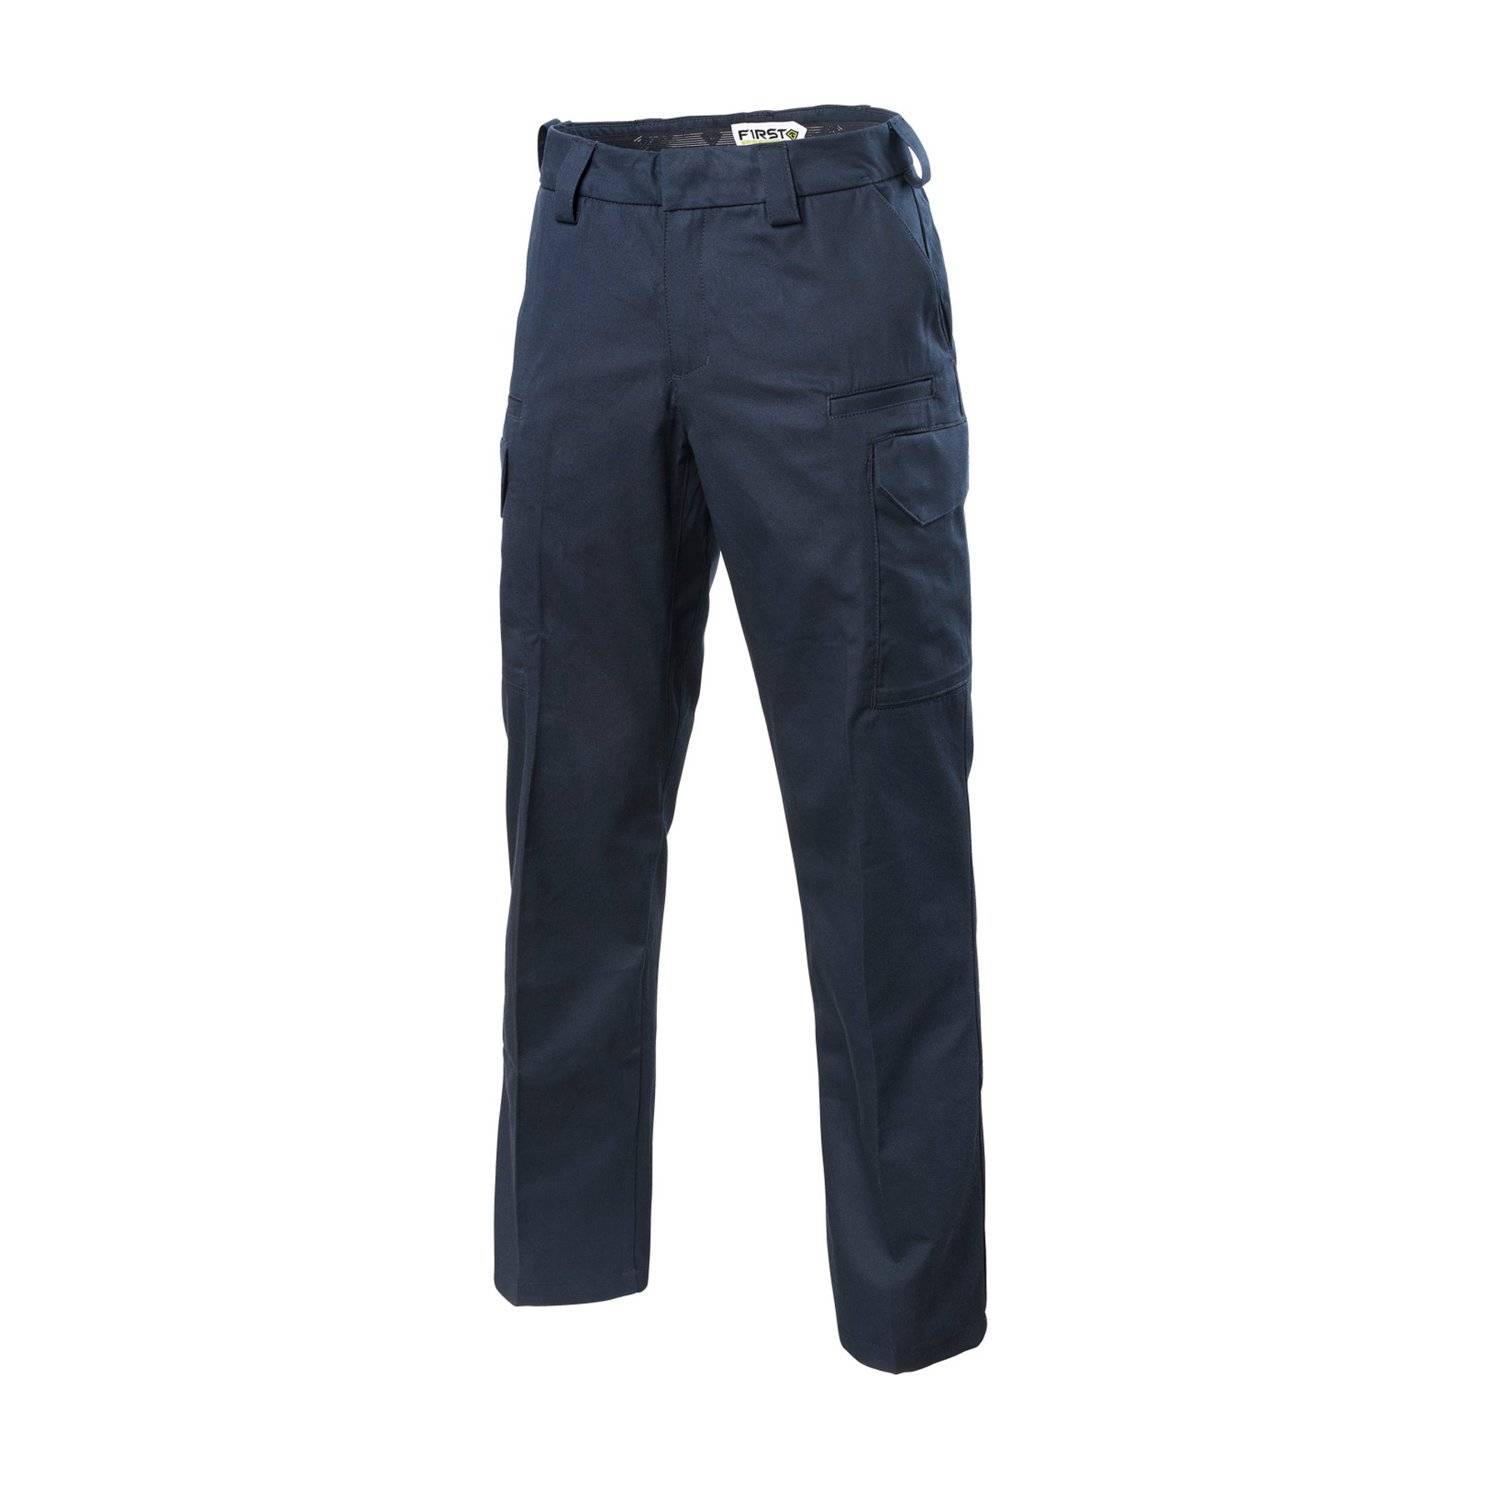 First Tactical Women's Cotton Cargo Station Pants